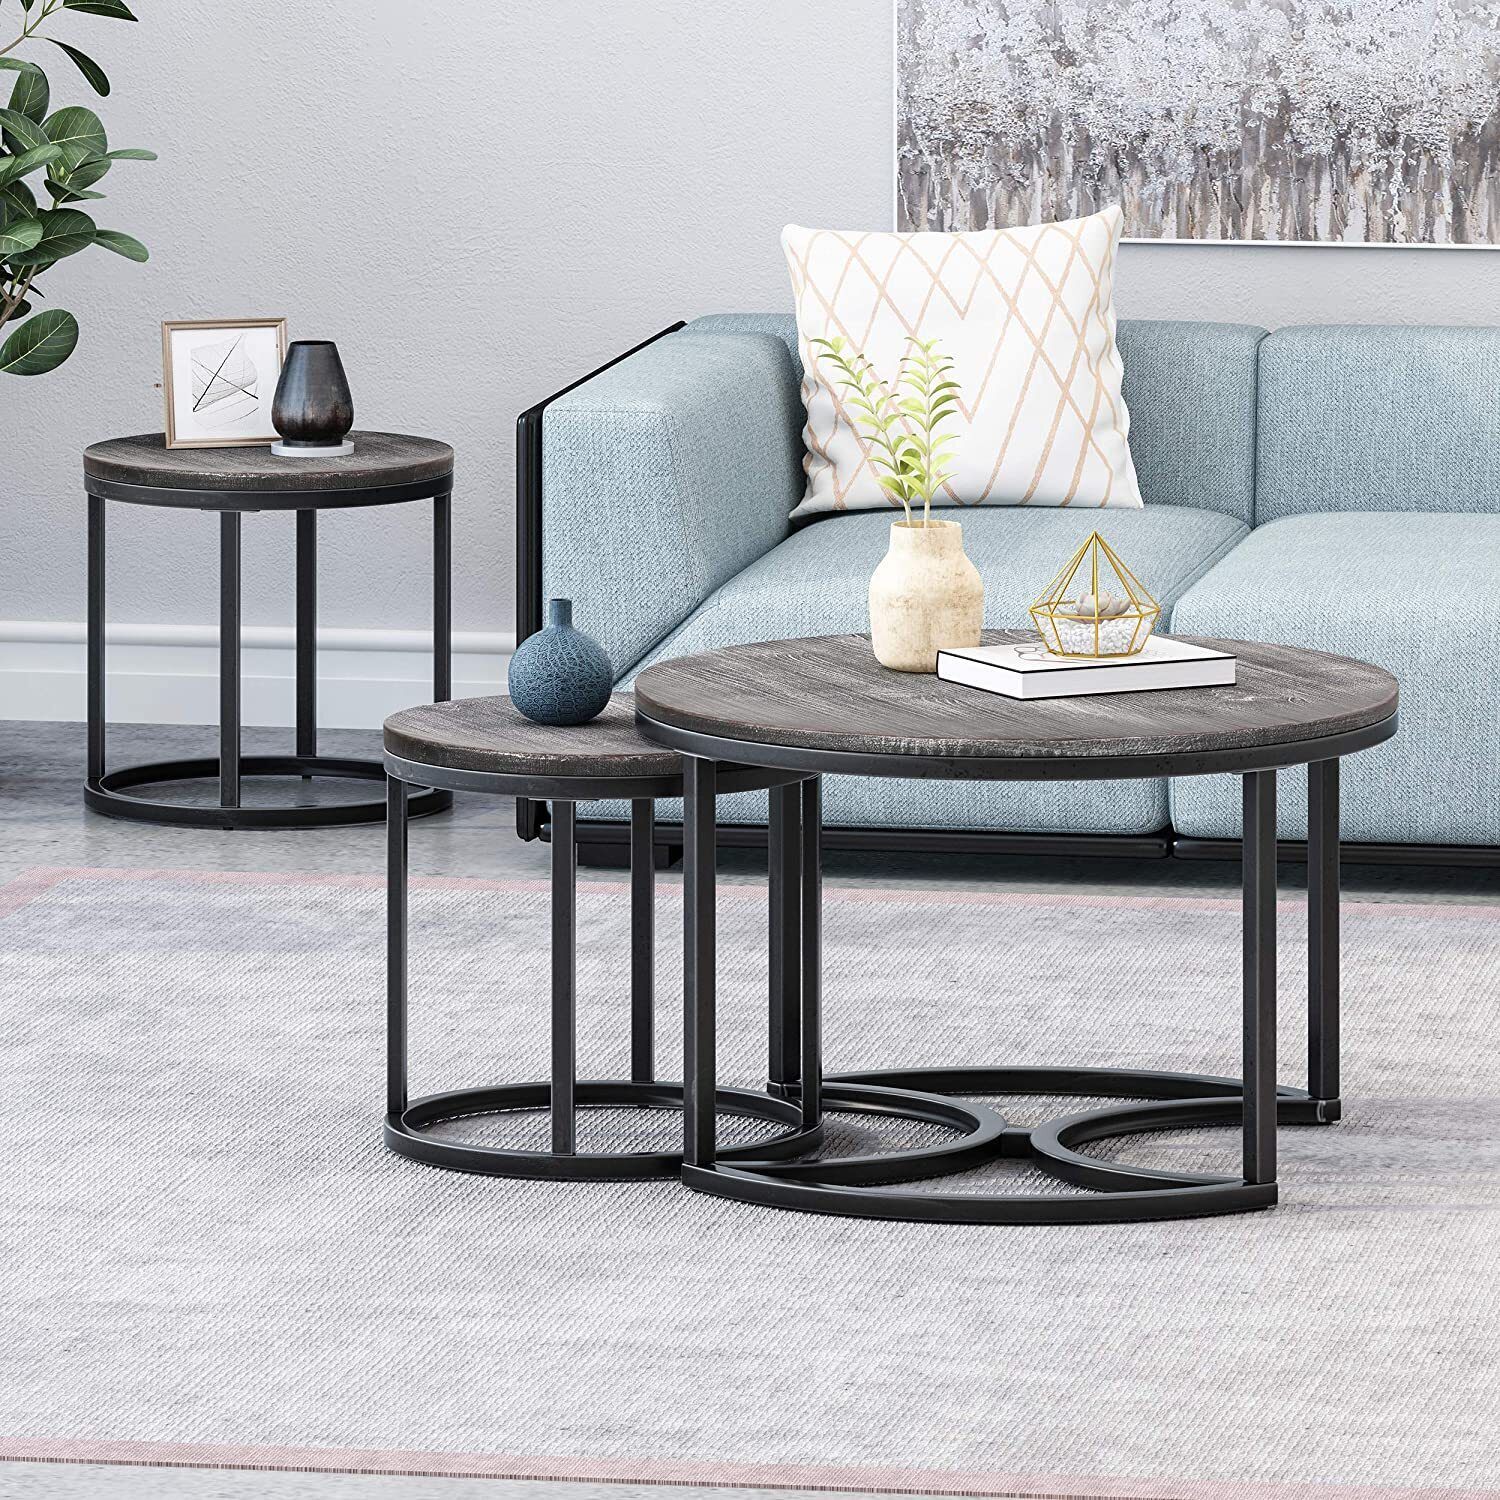 Pewter, Gray Round Table With Two Stools 